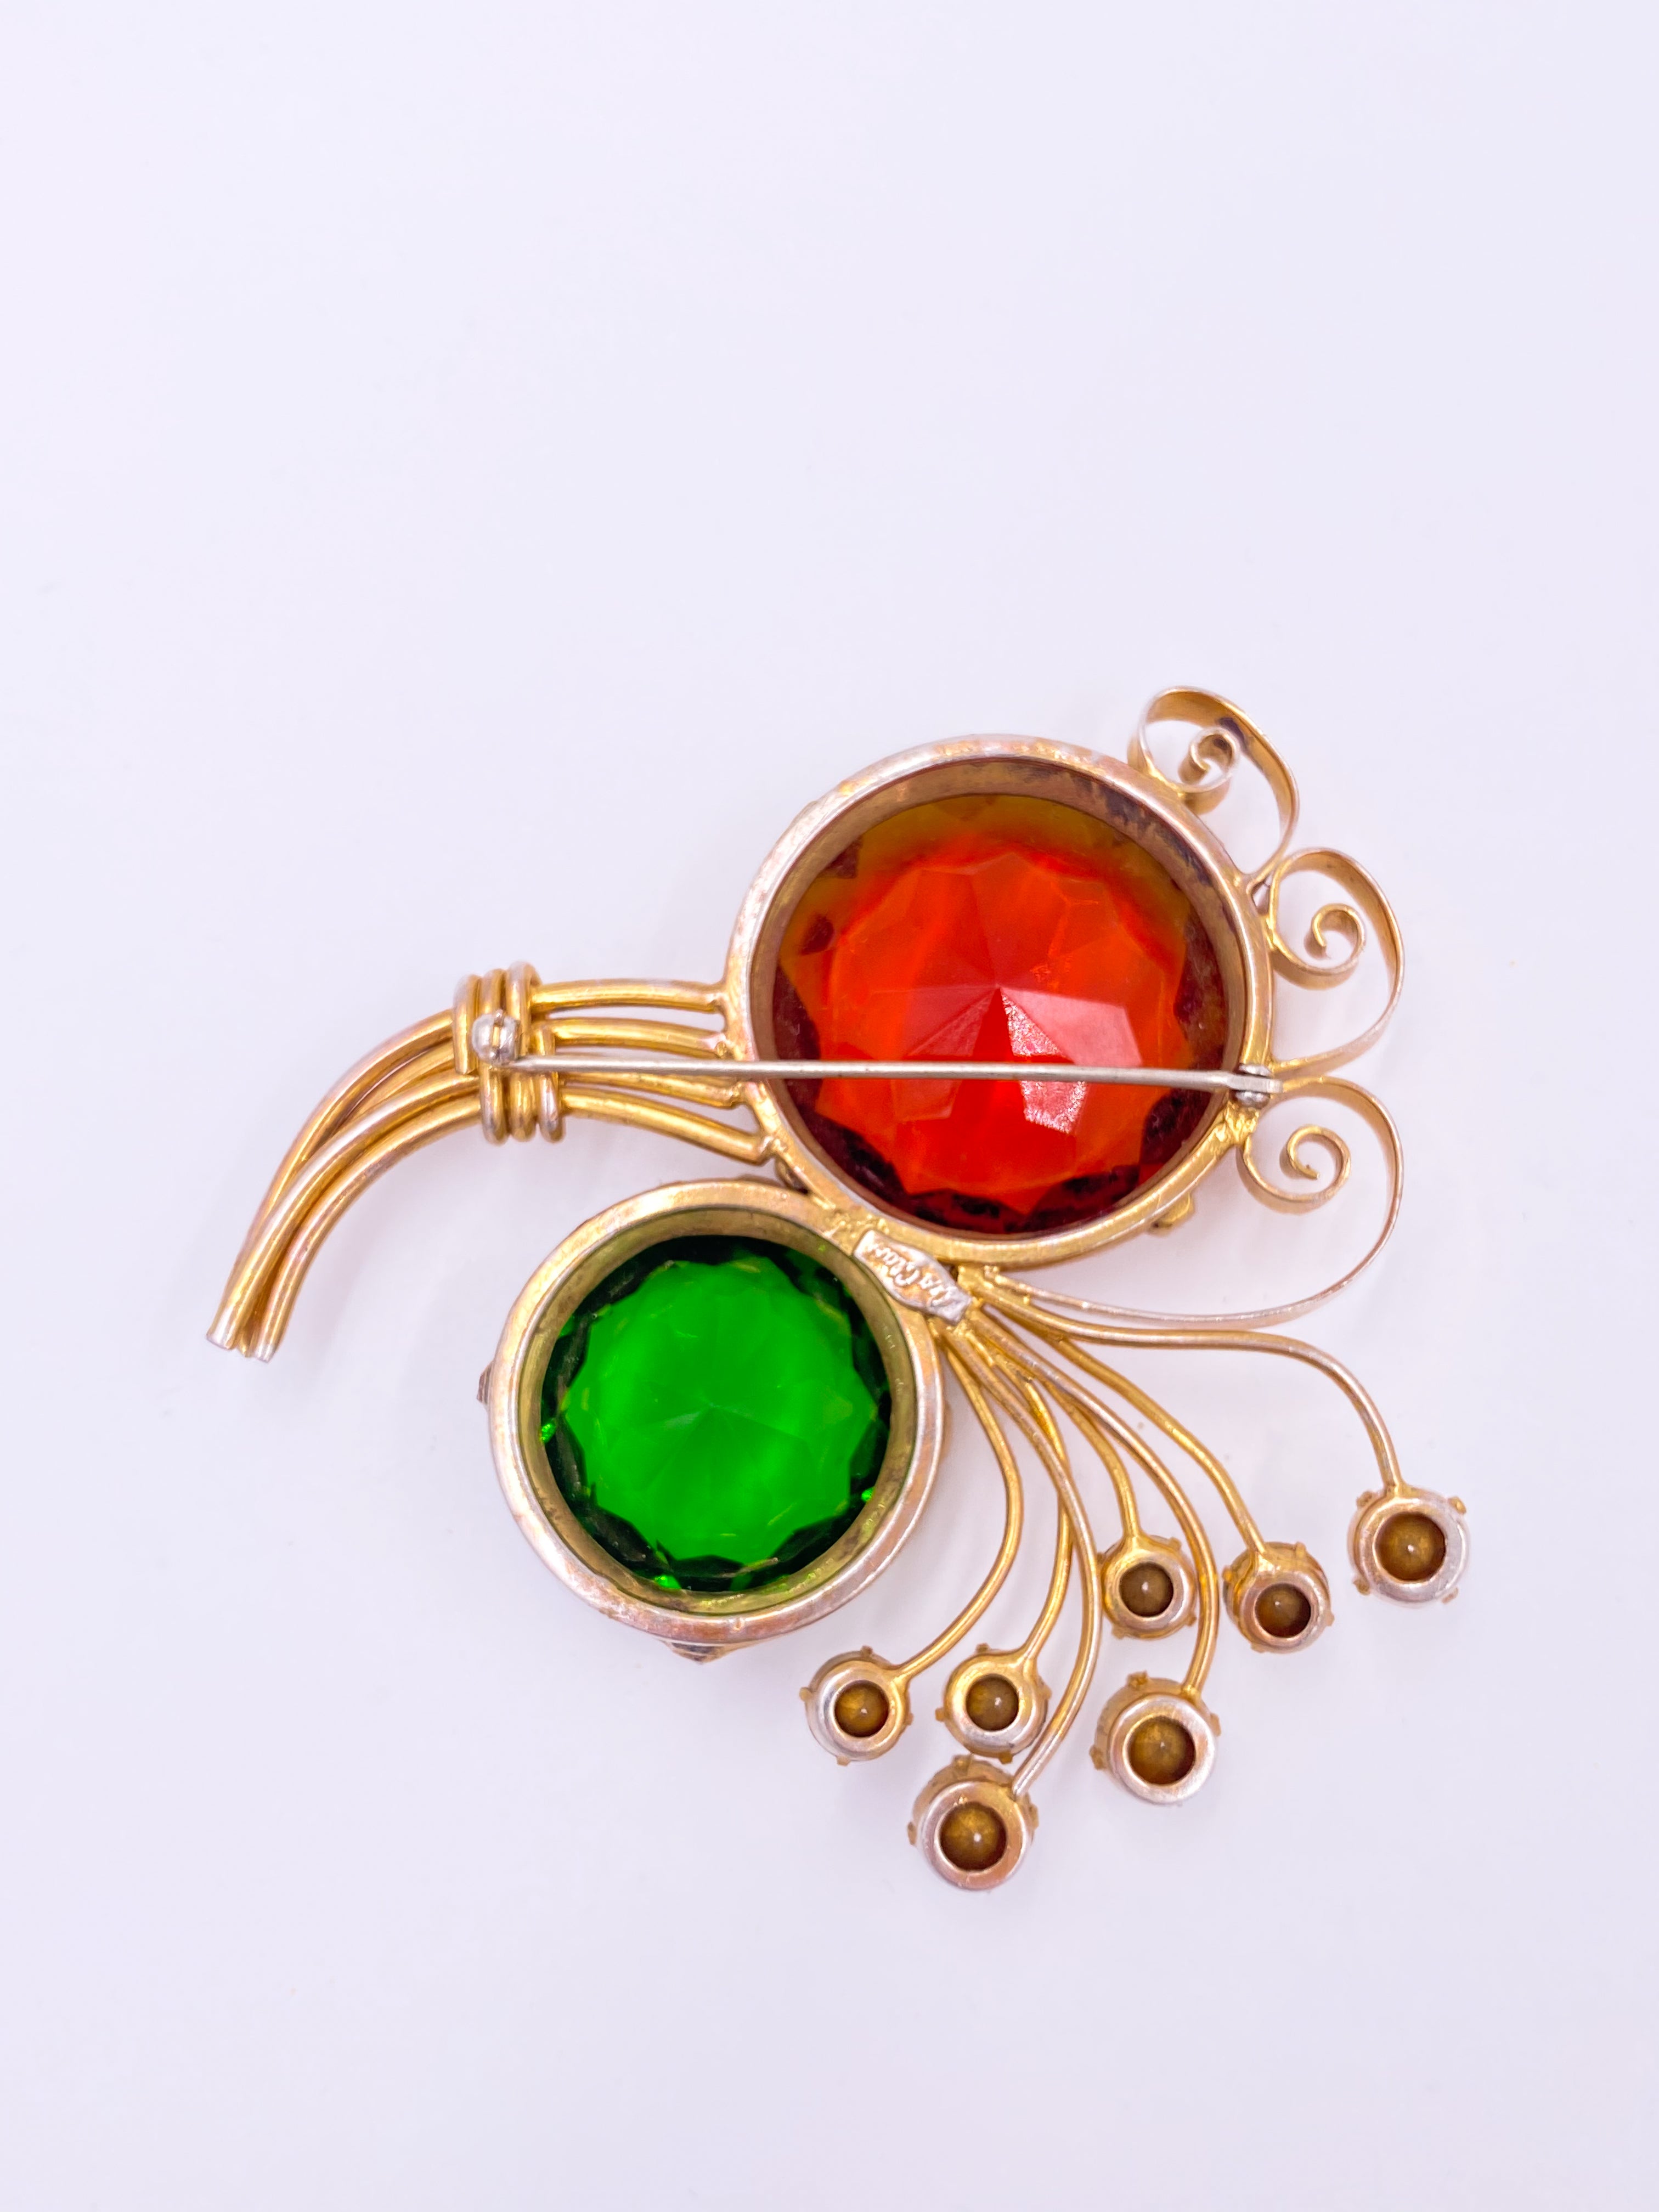 Leo Glass Red and Green Large Crystal Brooch